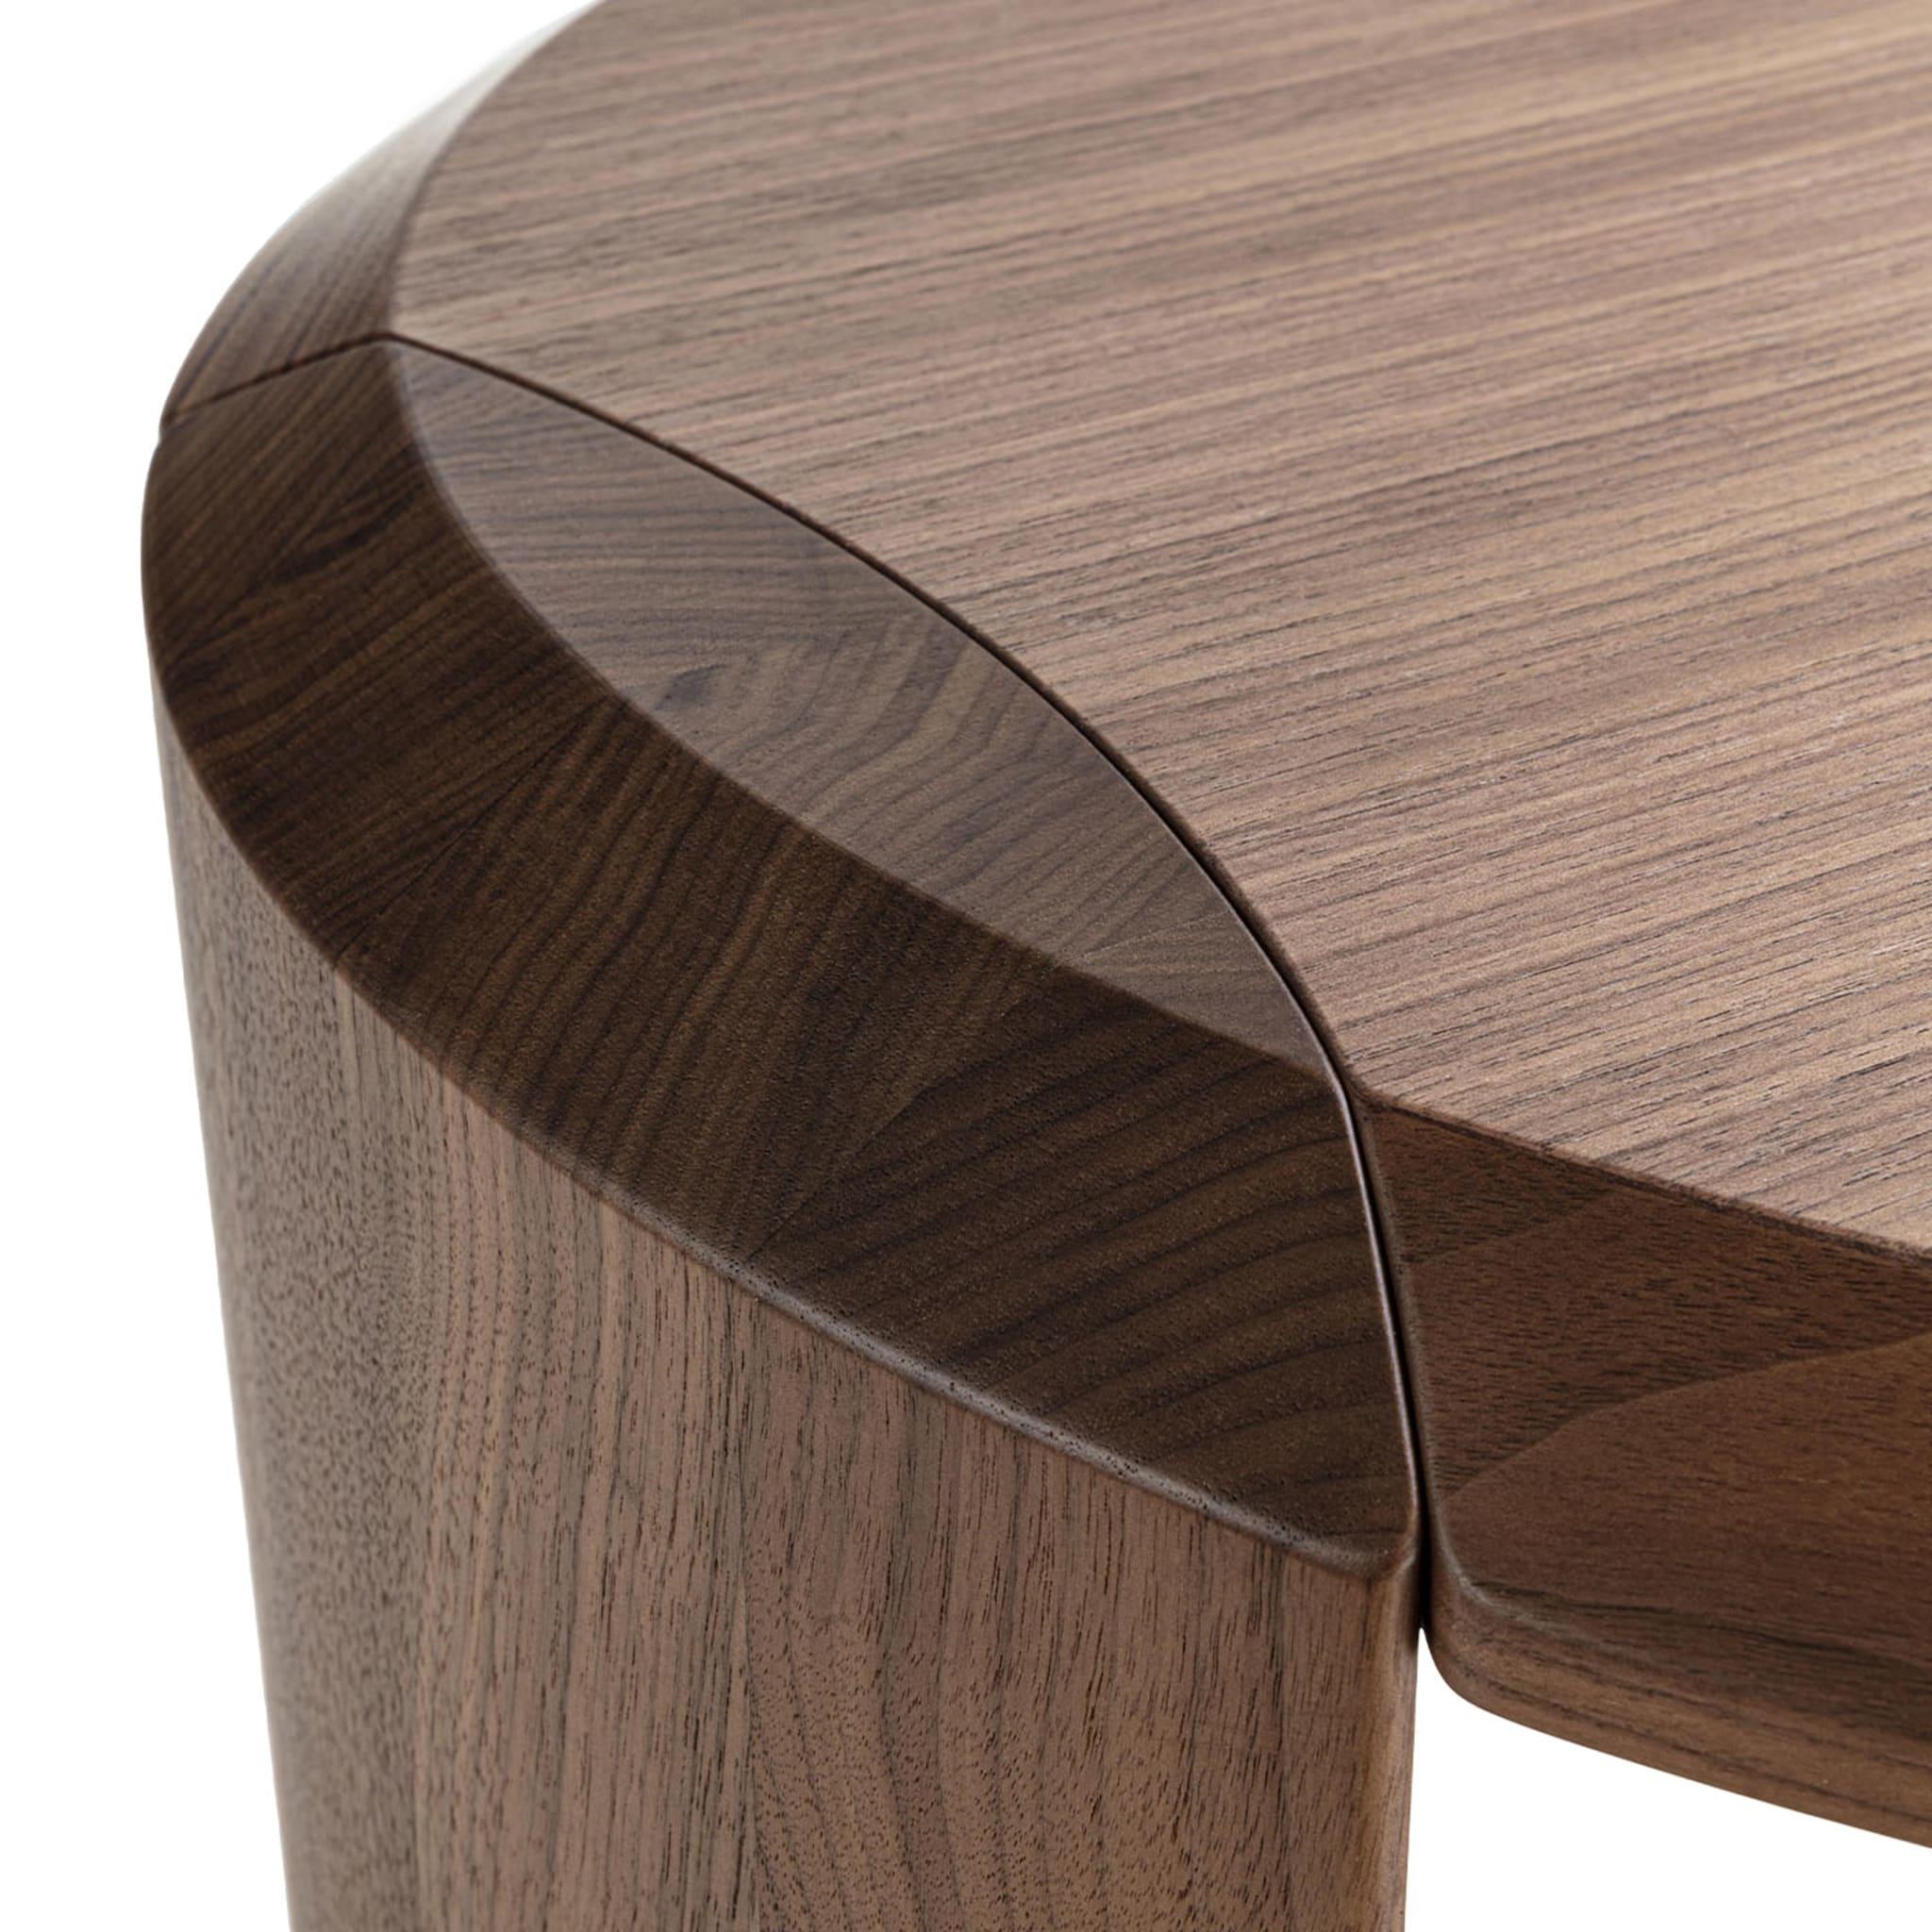 Elegantly-distributed geometric volumes define this sleek round side table, refined addition to interiors of modern and contemporary inspiration, alike. Characterized by a special seamless joint between the top and the almond-cut legs, the design